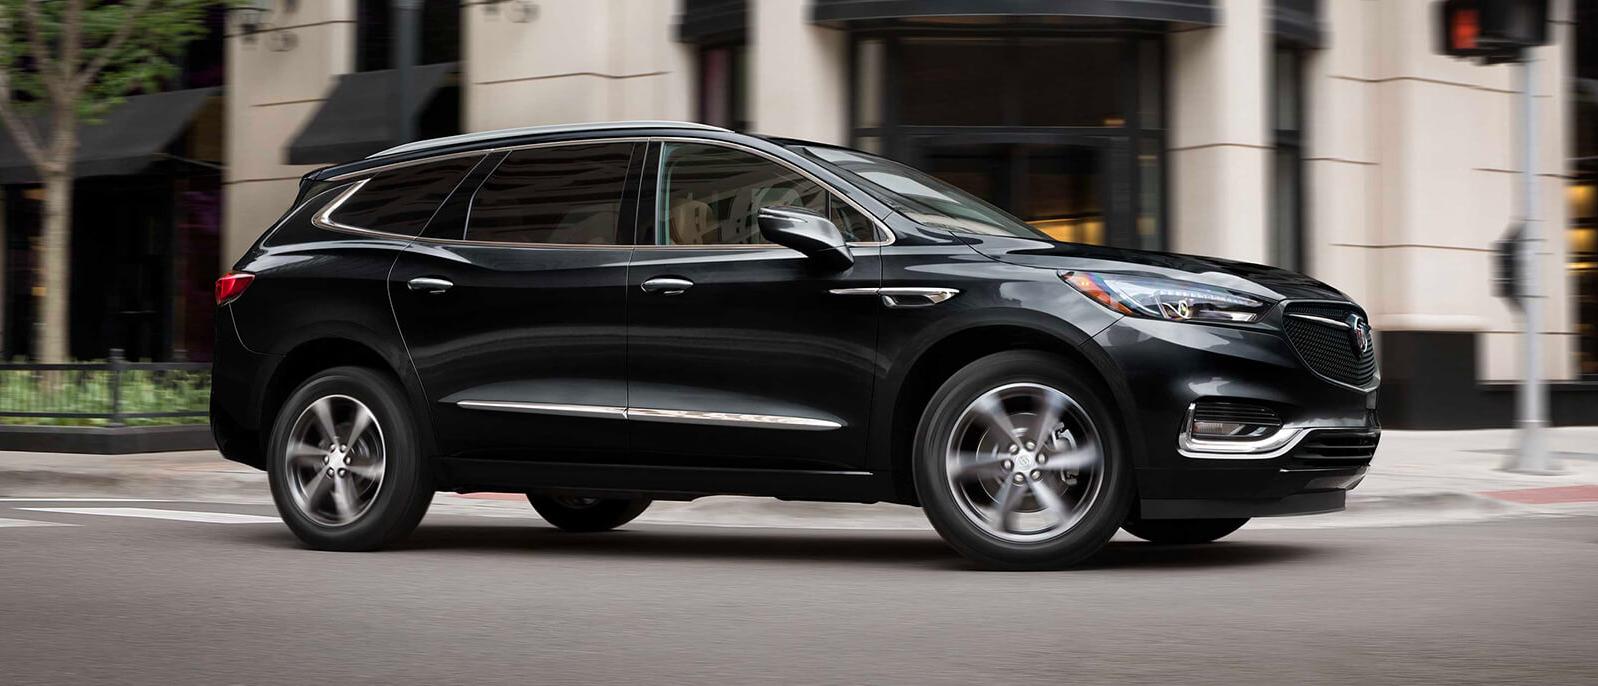 Black 2021 Buick Enclave on a road.